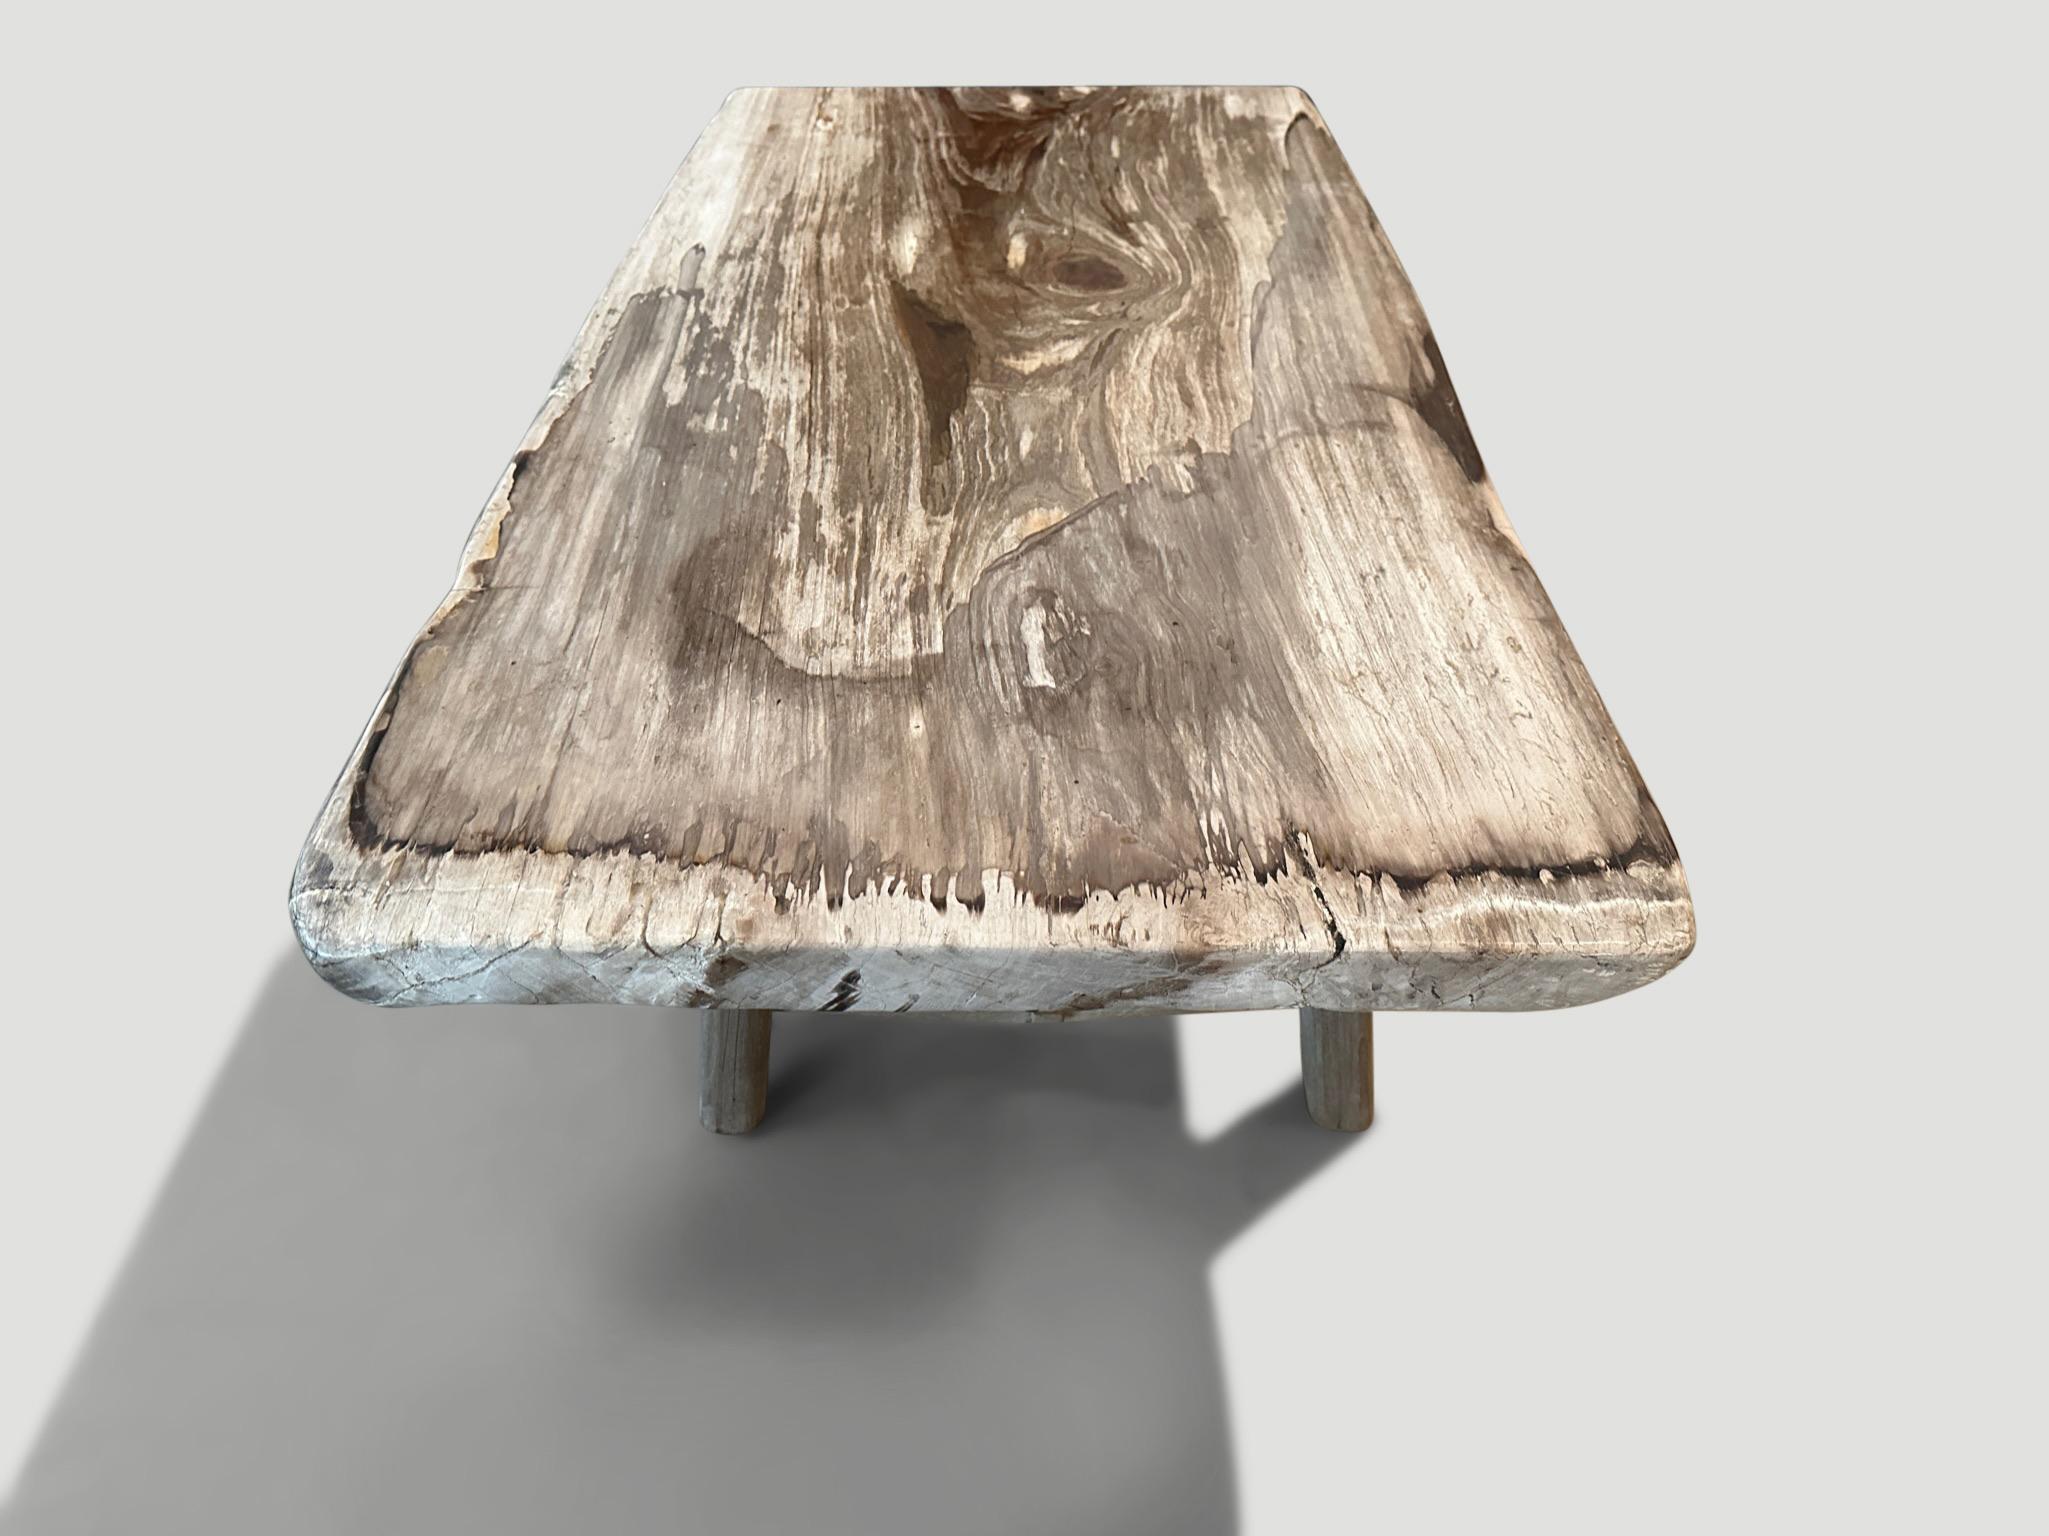 Andrianna Shamaris Single Slab Petrified Wood Coffee Table In Excellent Condition For Sale In New York, NY